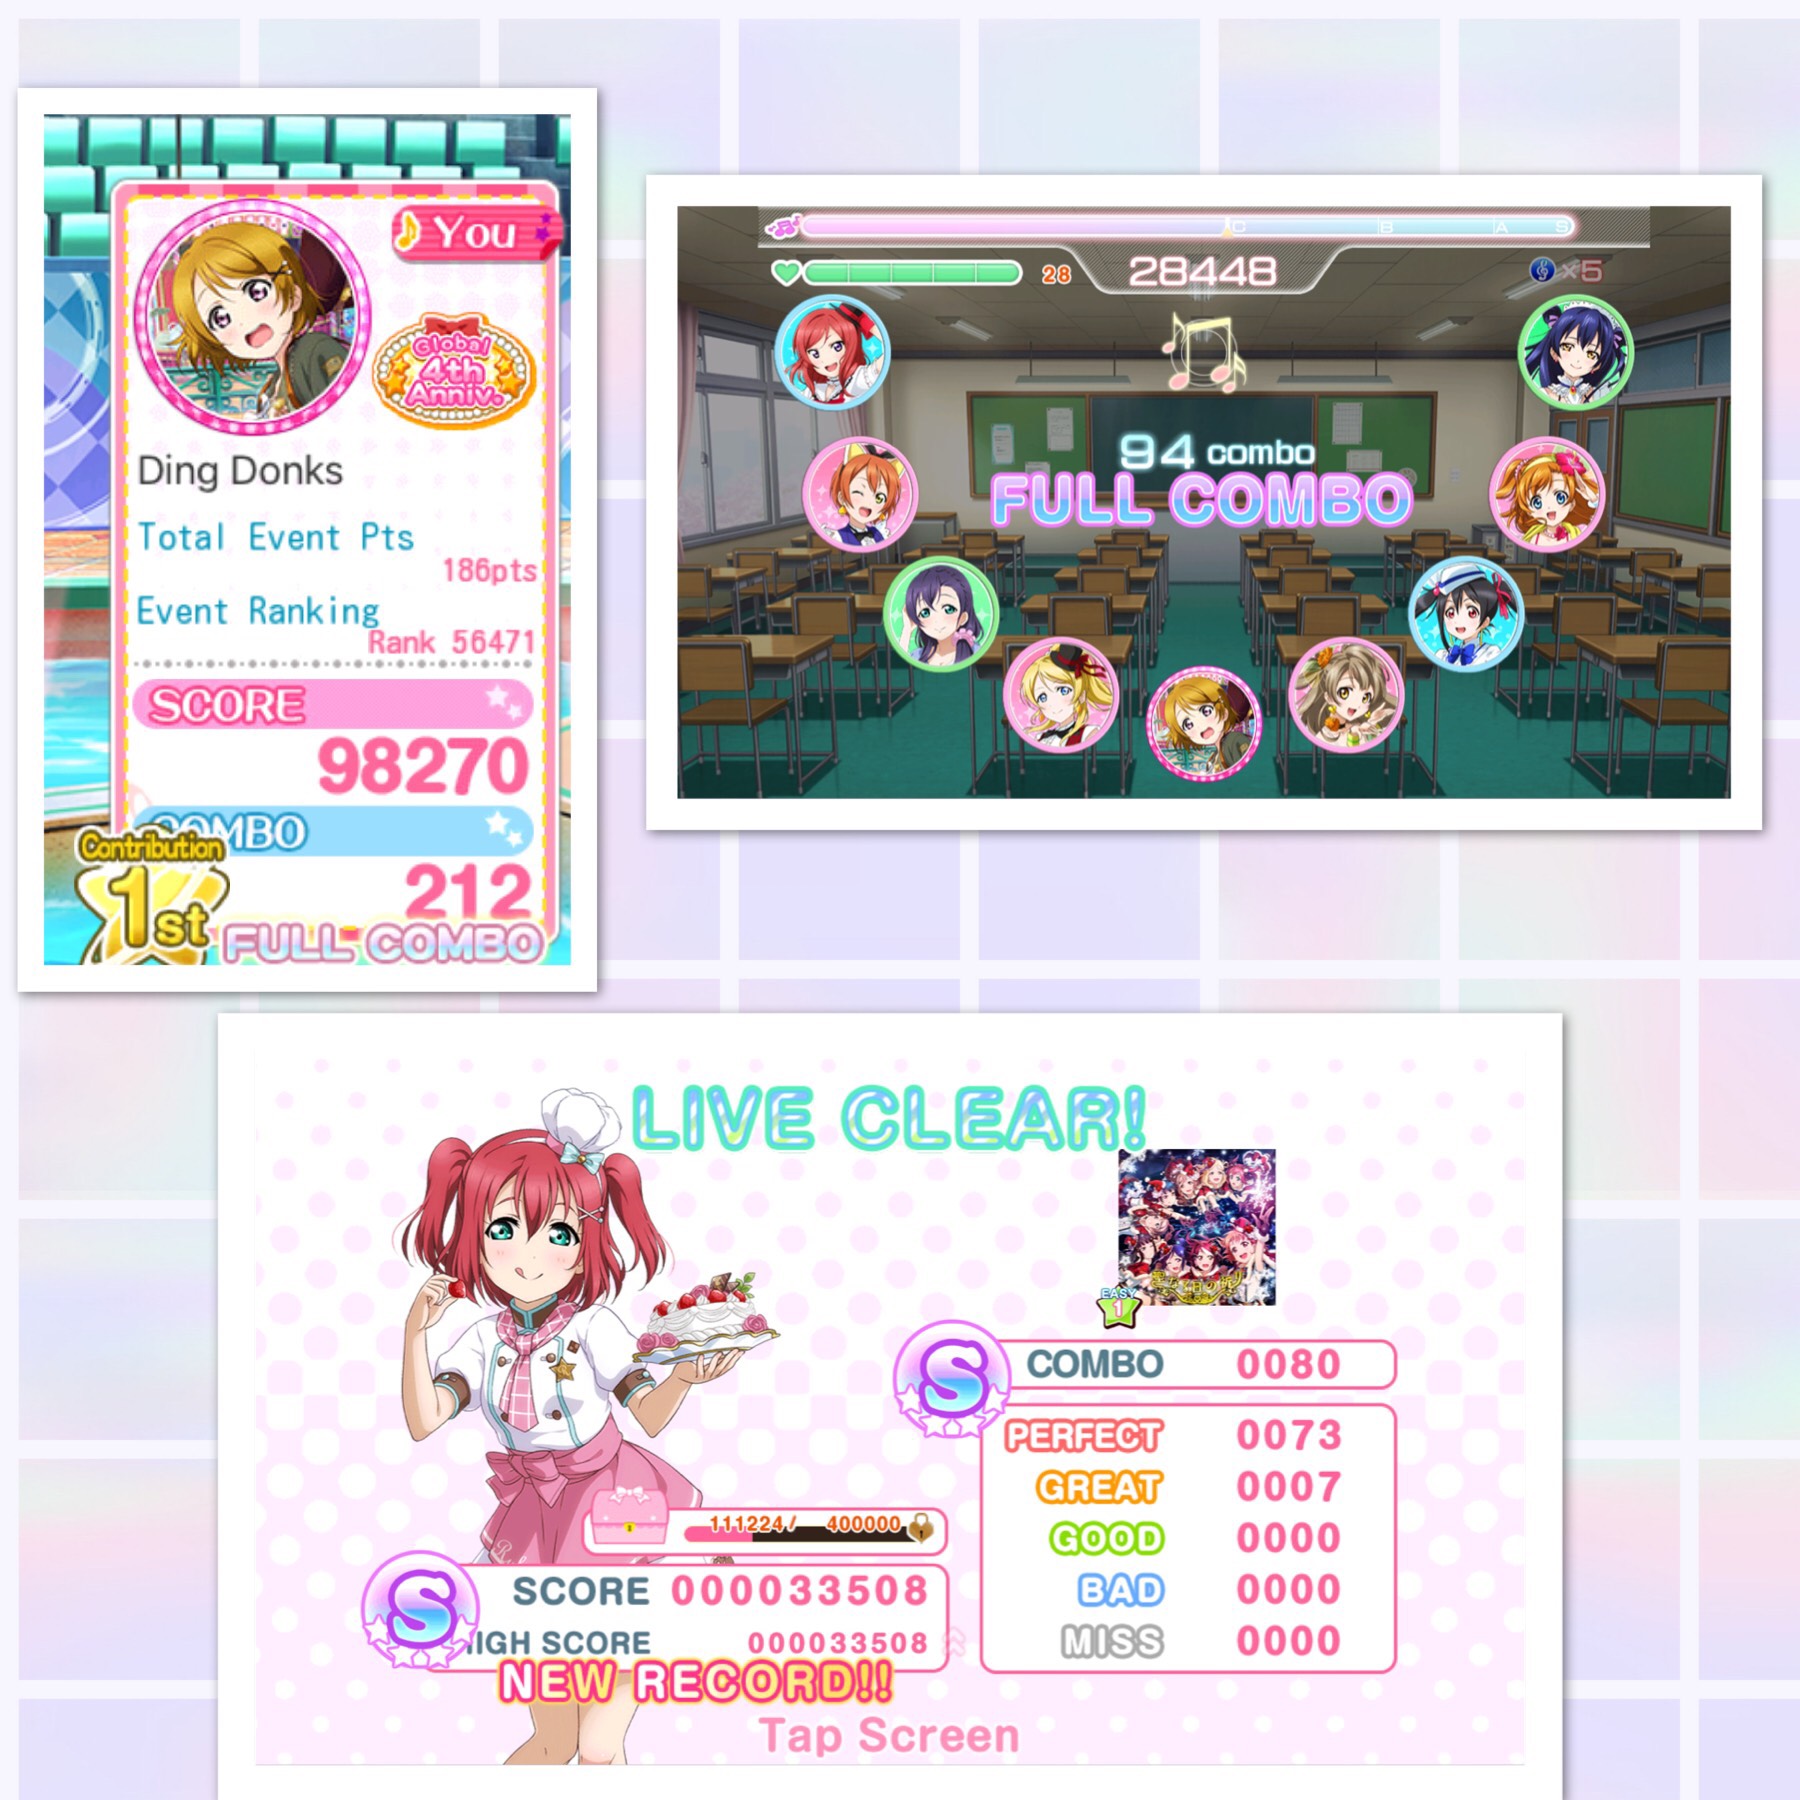 What? Me? Playing Love Live again. That’s funny. 